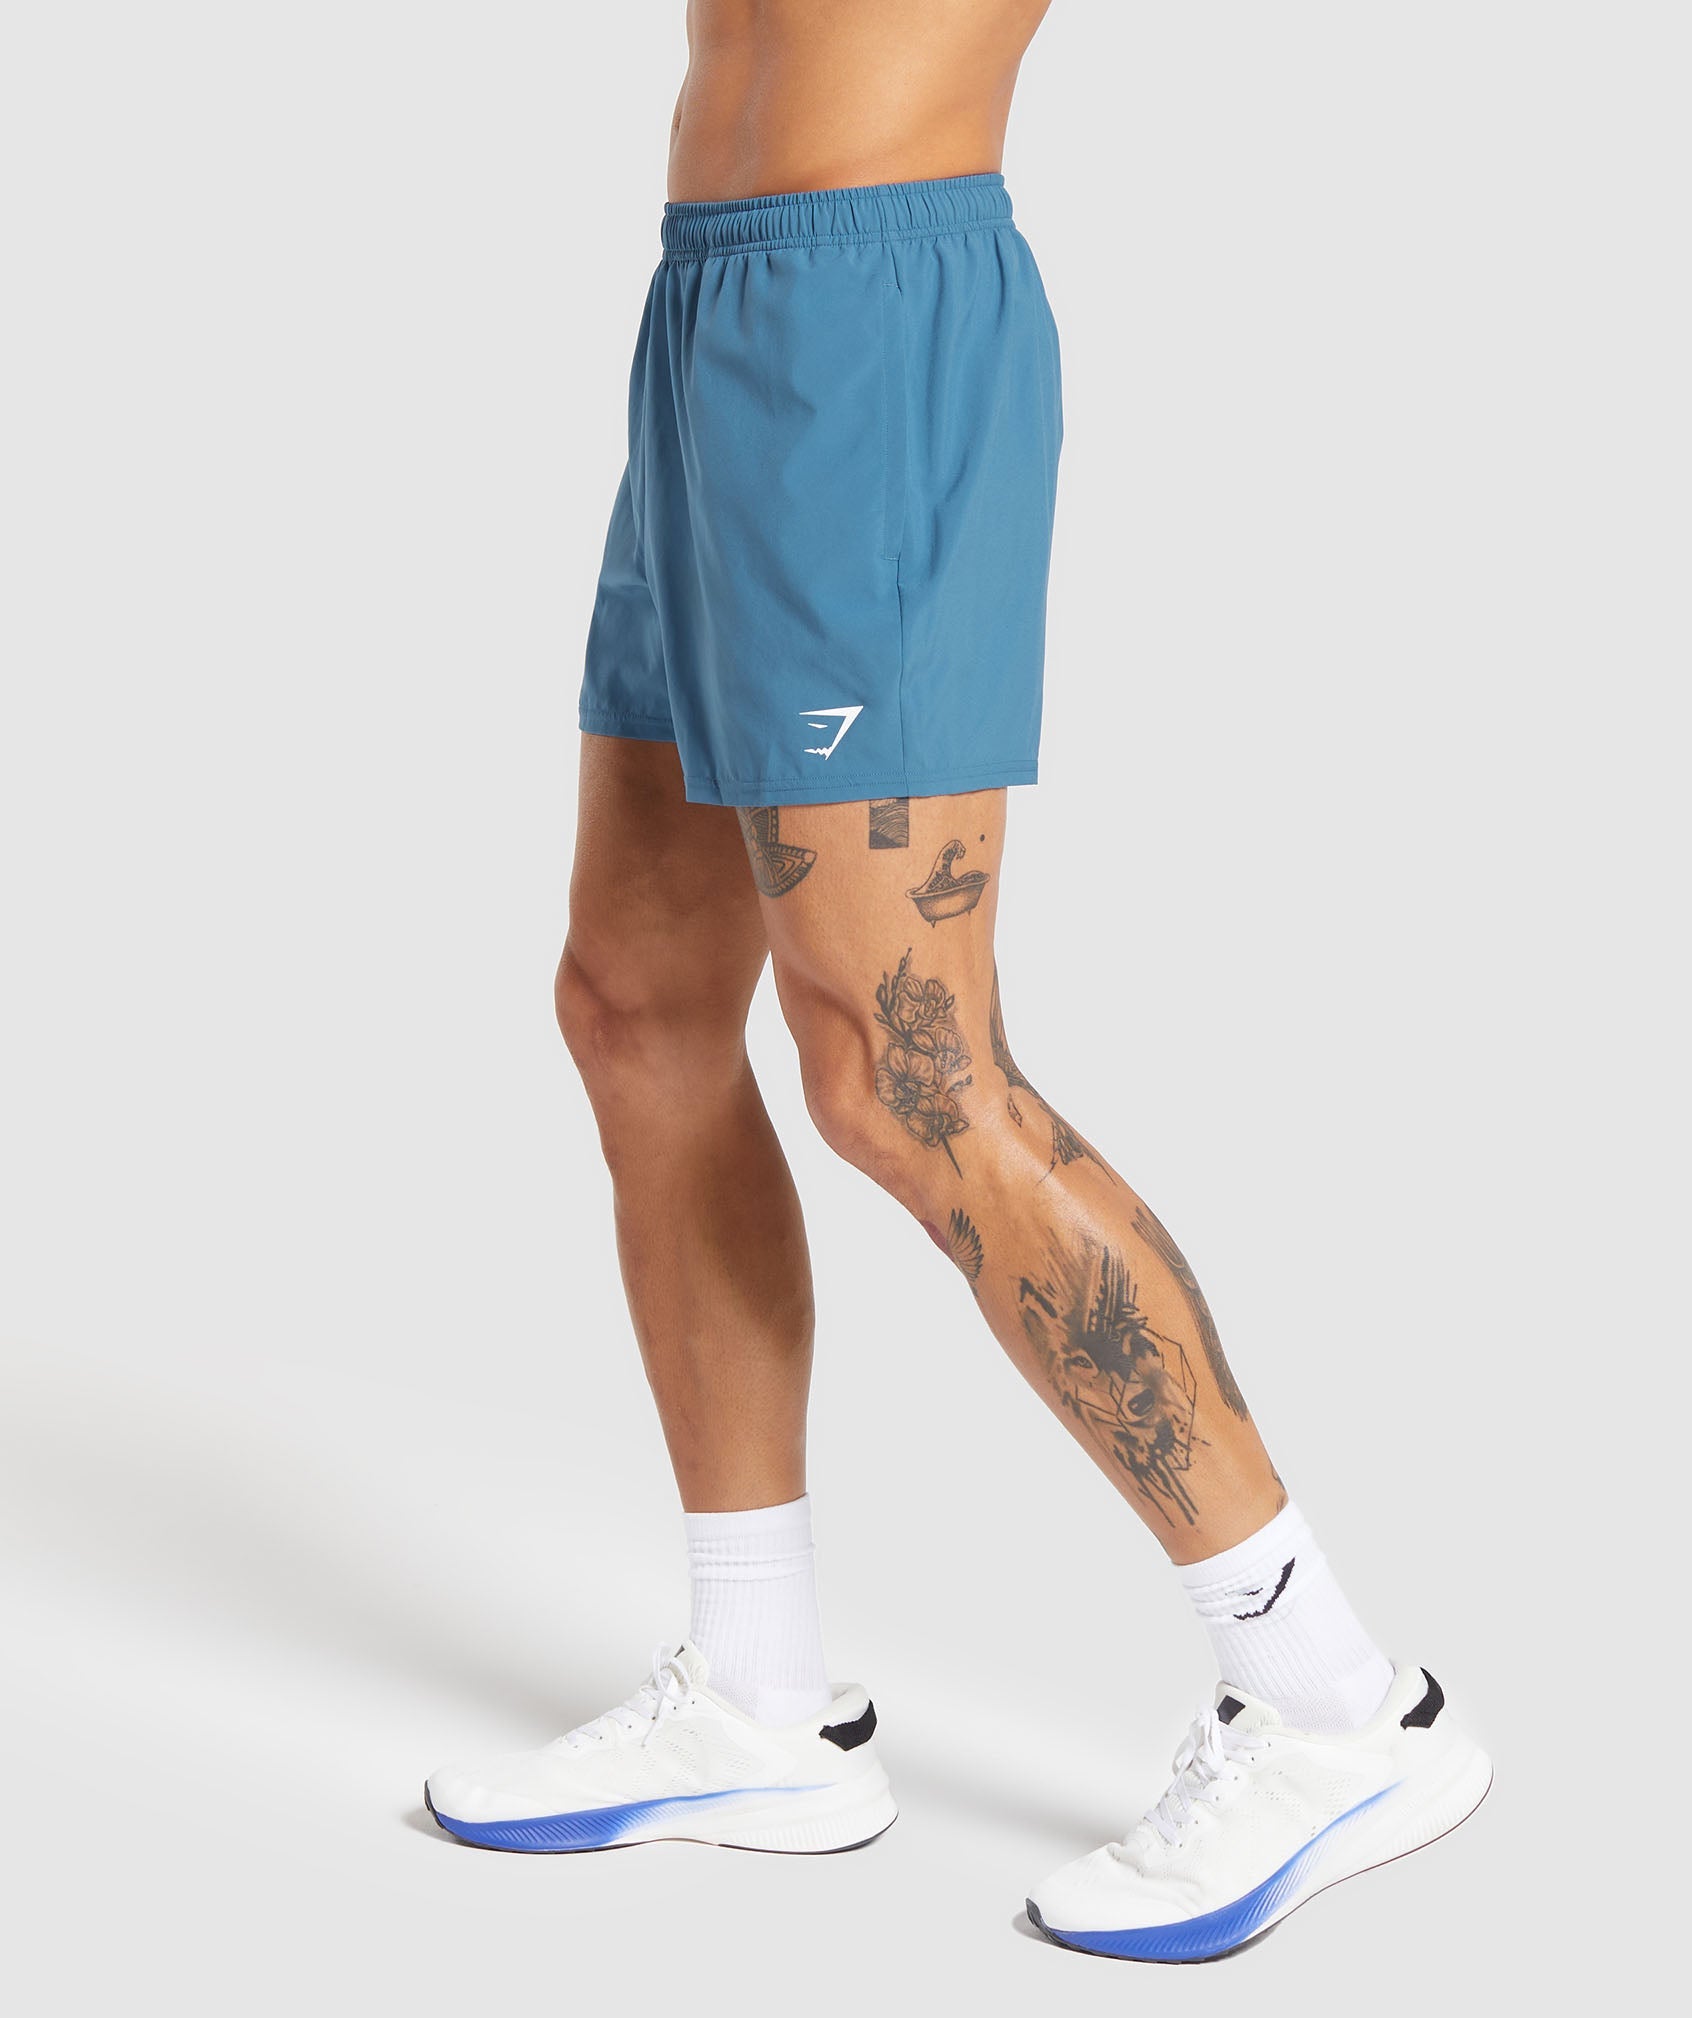 Arrival 5" Shorts in Utility Blue - view 3